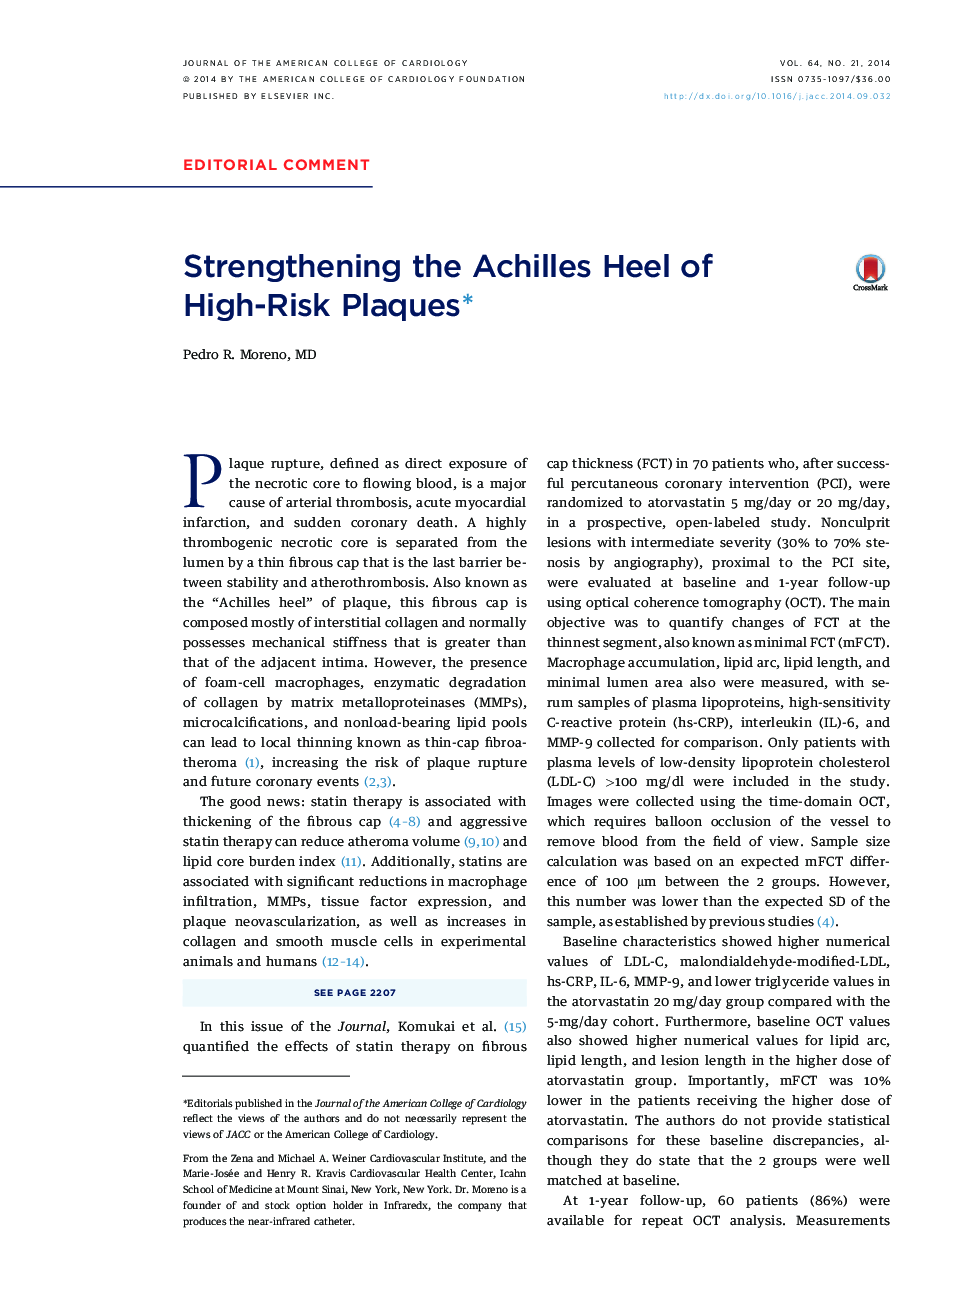 Strengthening the Achilles Heel of High-Risk Plaquesâ